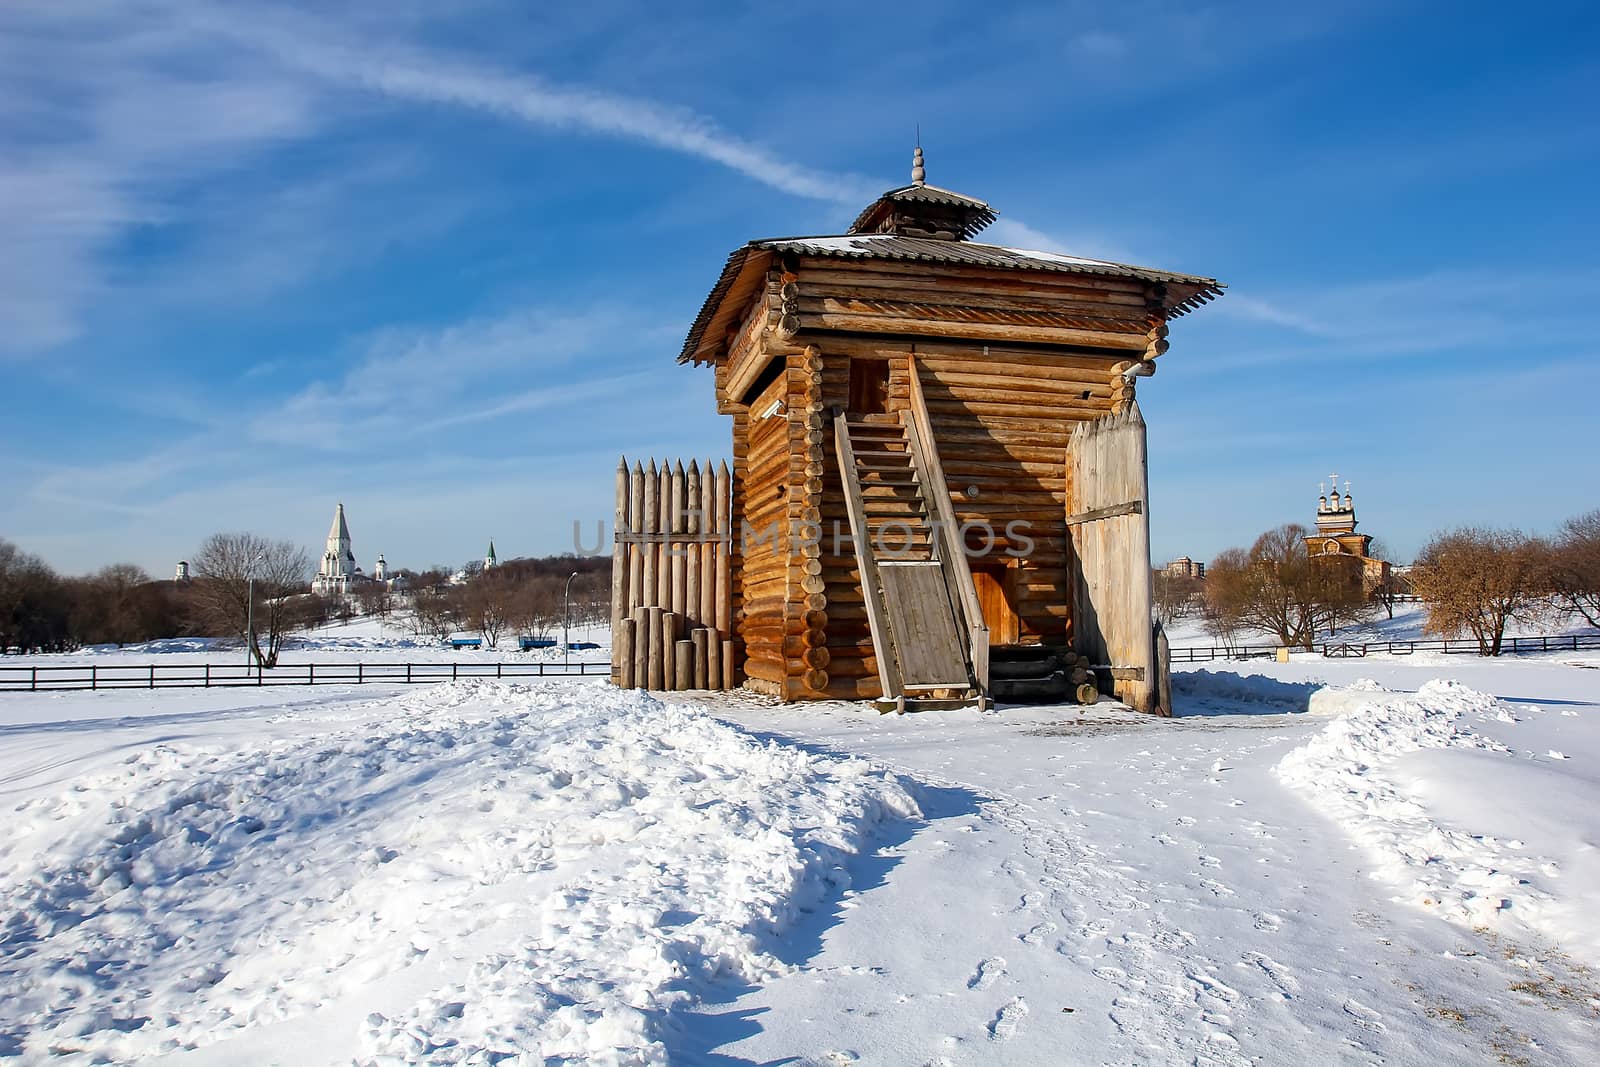 The Wooden Tower of the Bratsk fortress in Kolomenskoye. Russian wooden military structure in Moscow from Siberia. Winter landscape with a snowy road and a beautiful blue sky.